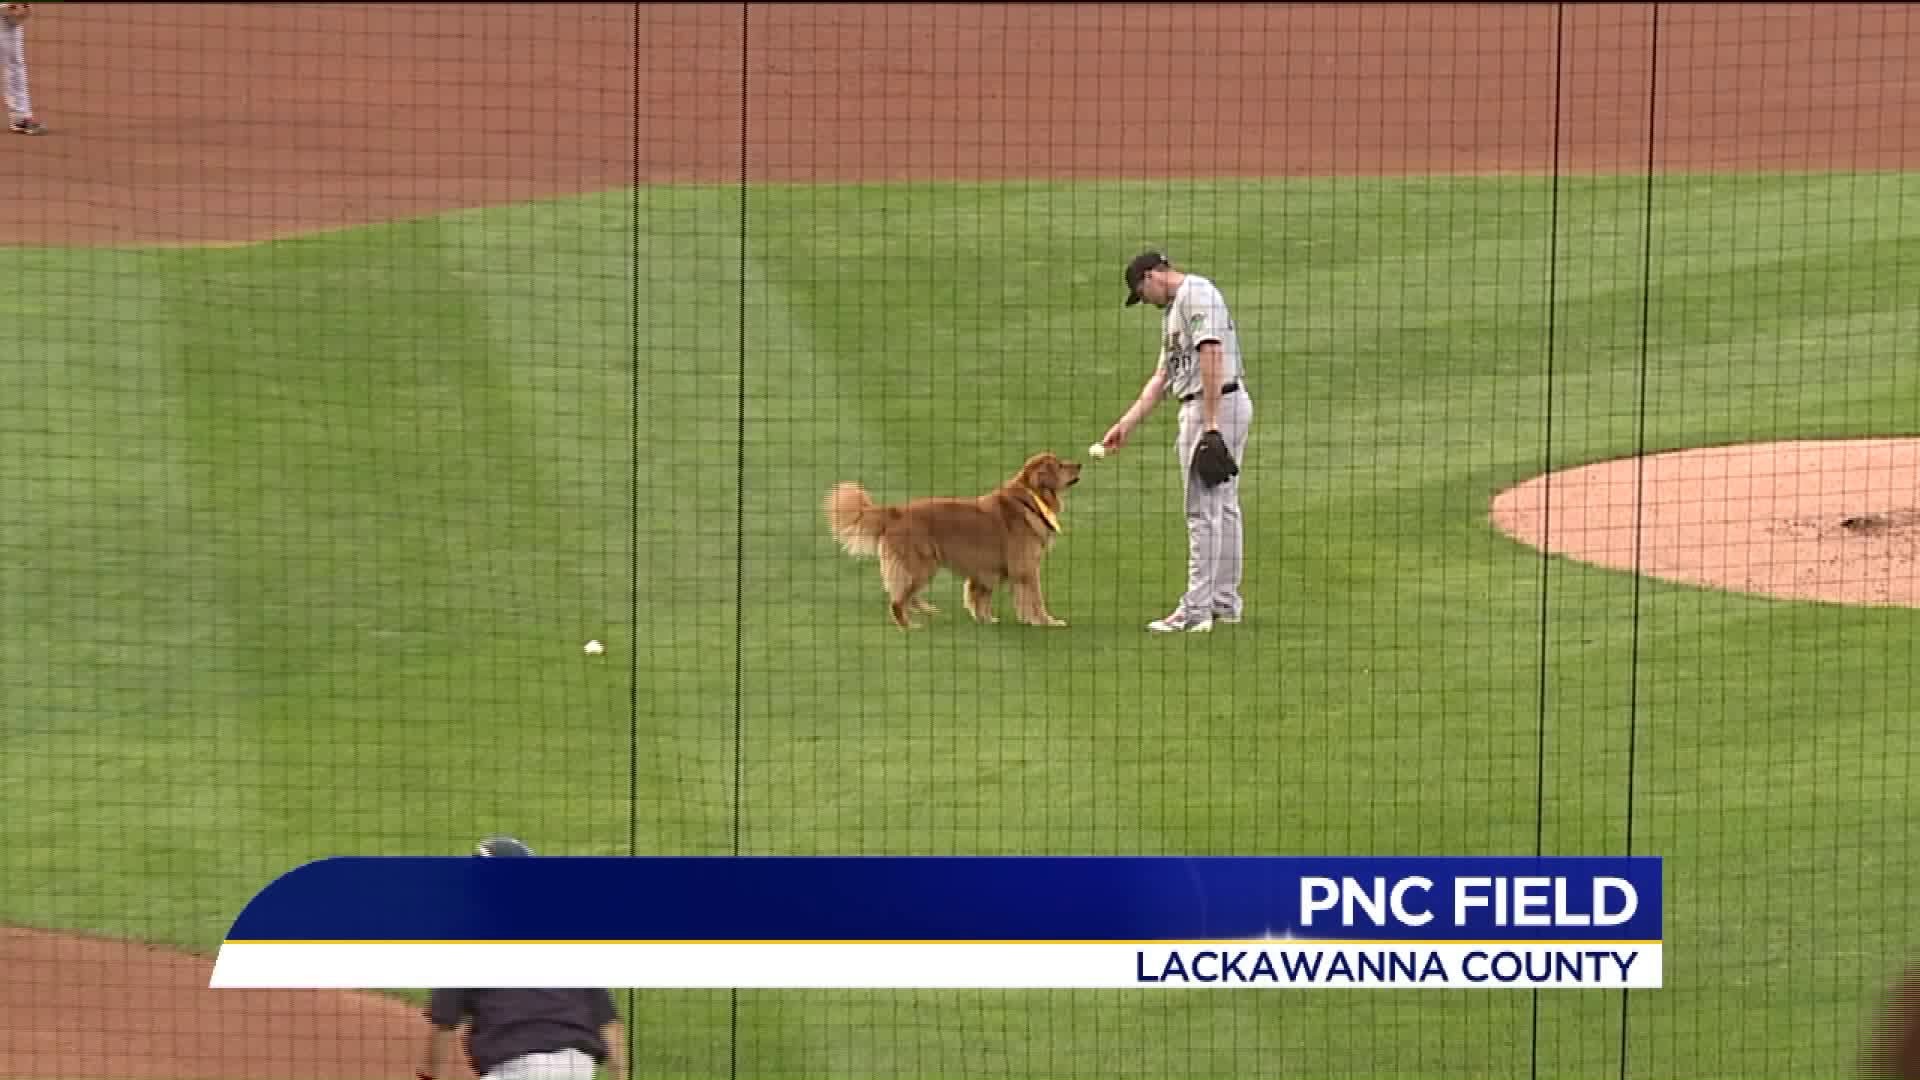 Game of `Fetch` at PNC Field